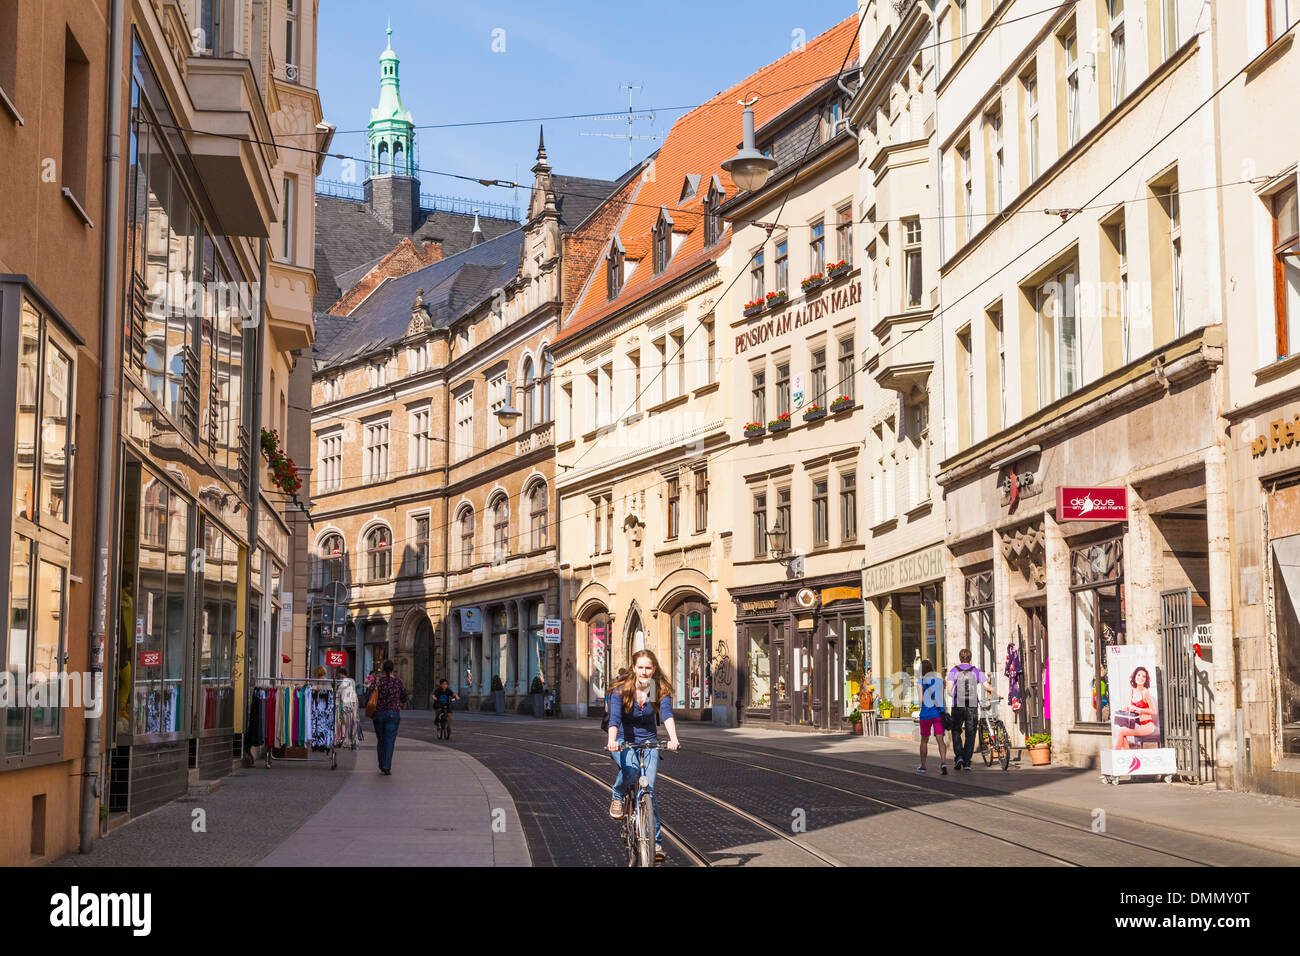 Germany, Saxony-Anhalt, Halle, Shops in the old town Stock Photo